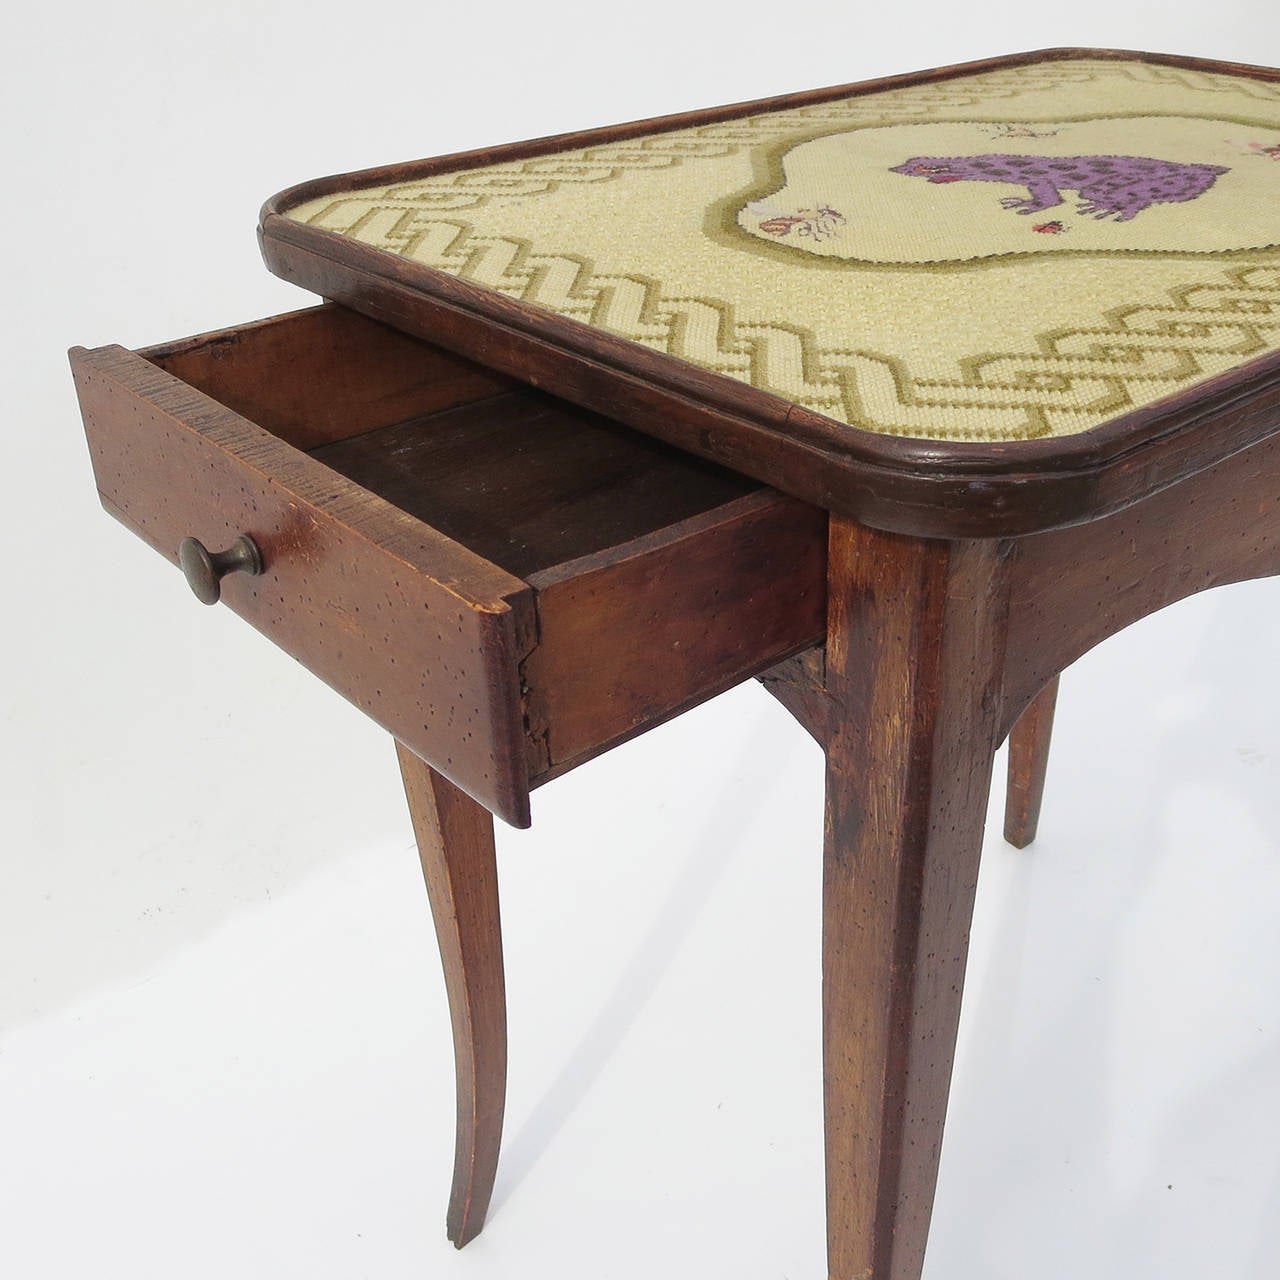 Wood Empire Occasional Table with Embroidery Top